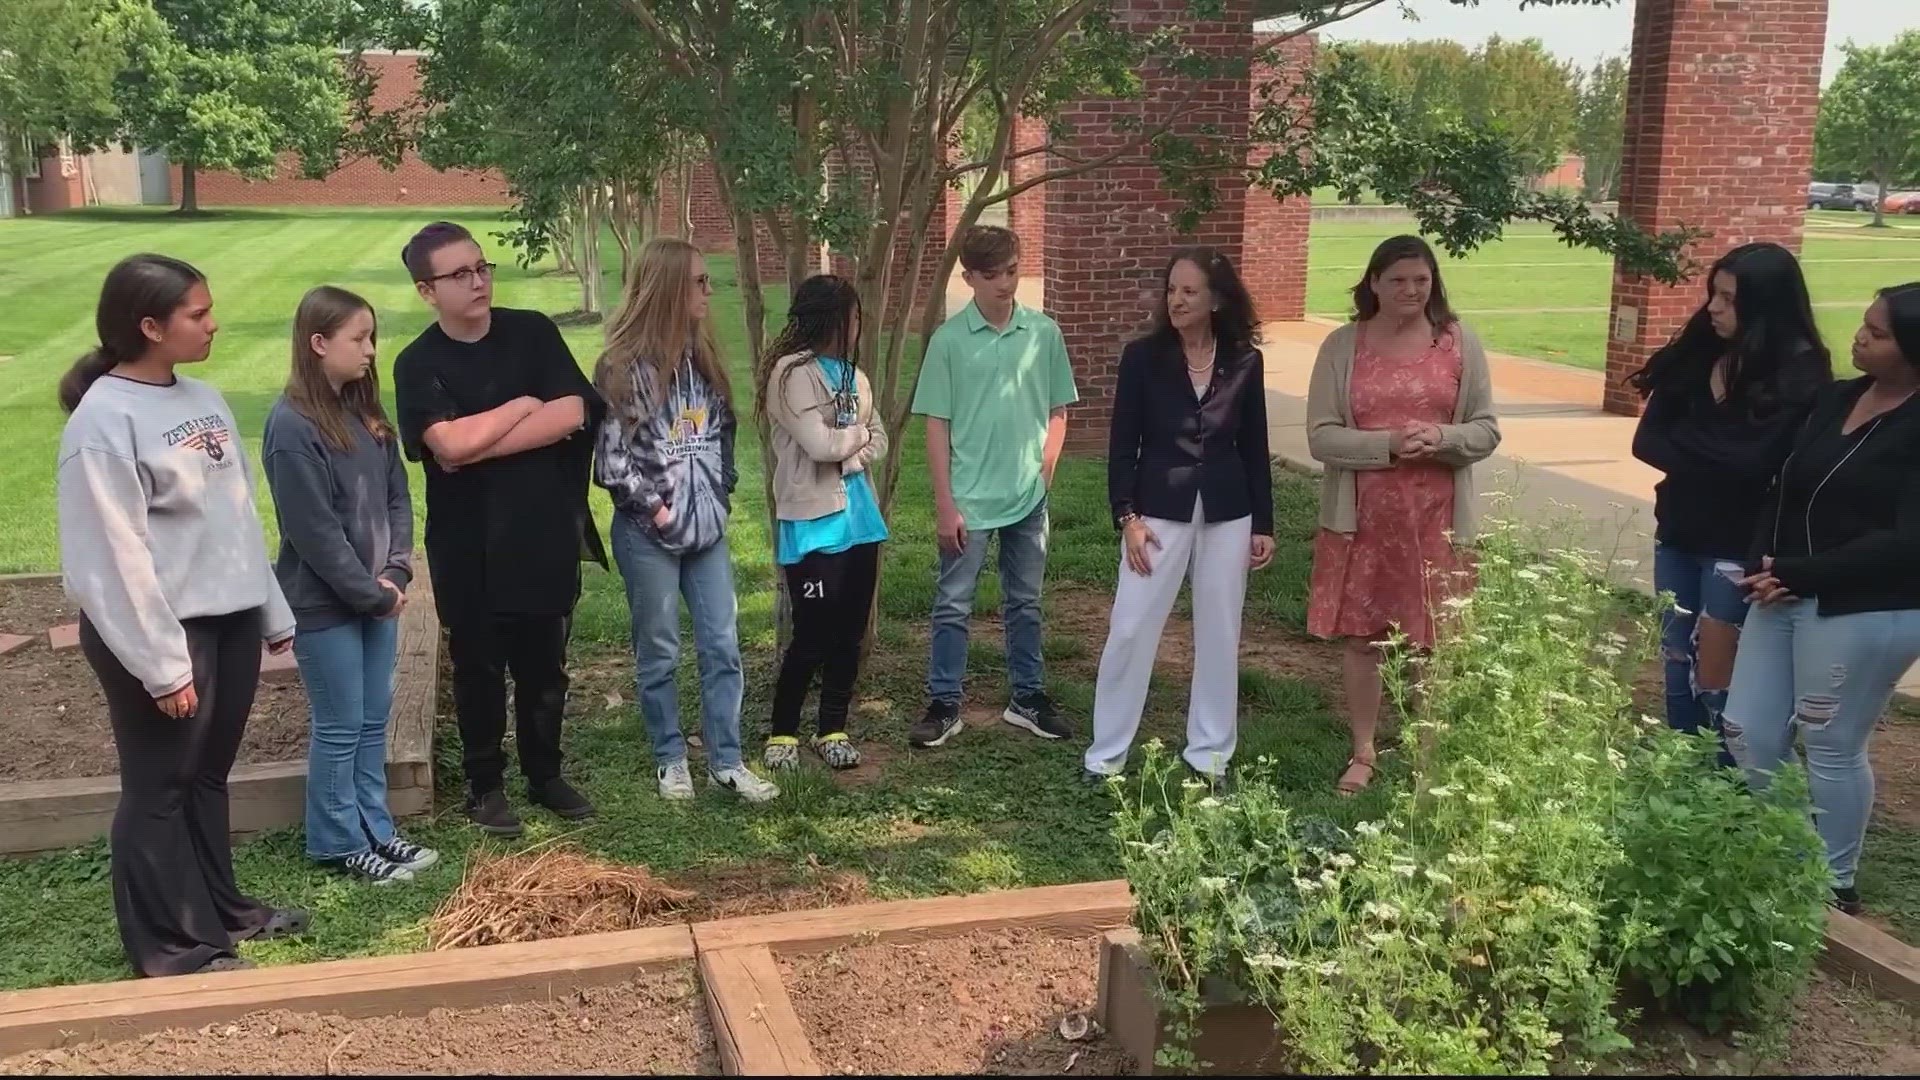 Manassas Park Middle school is one of our ECO Challenge winners. Now they're working with experts from the Smithsonian Science Education Center to plan their project